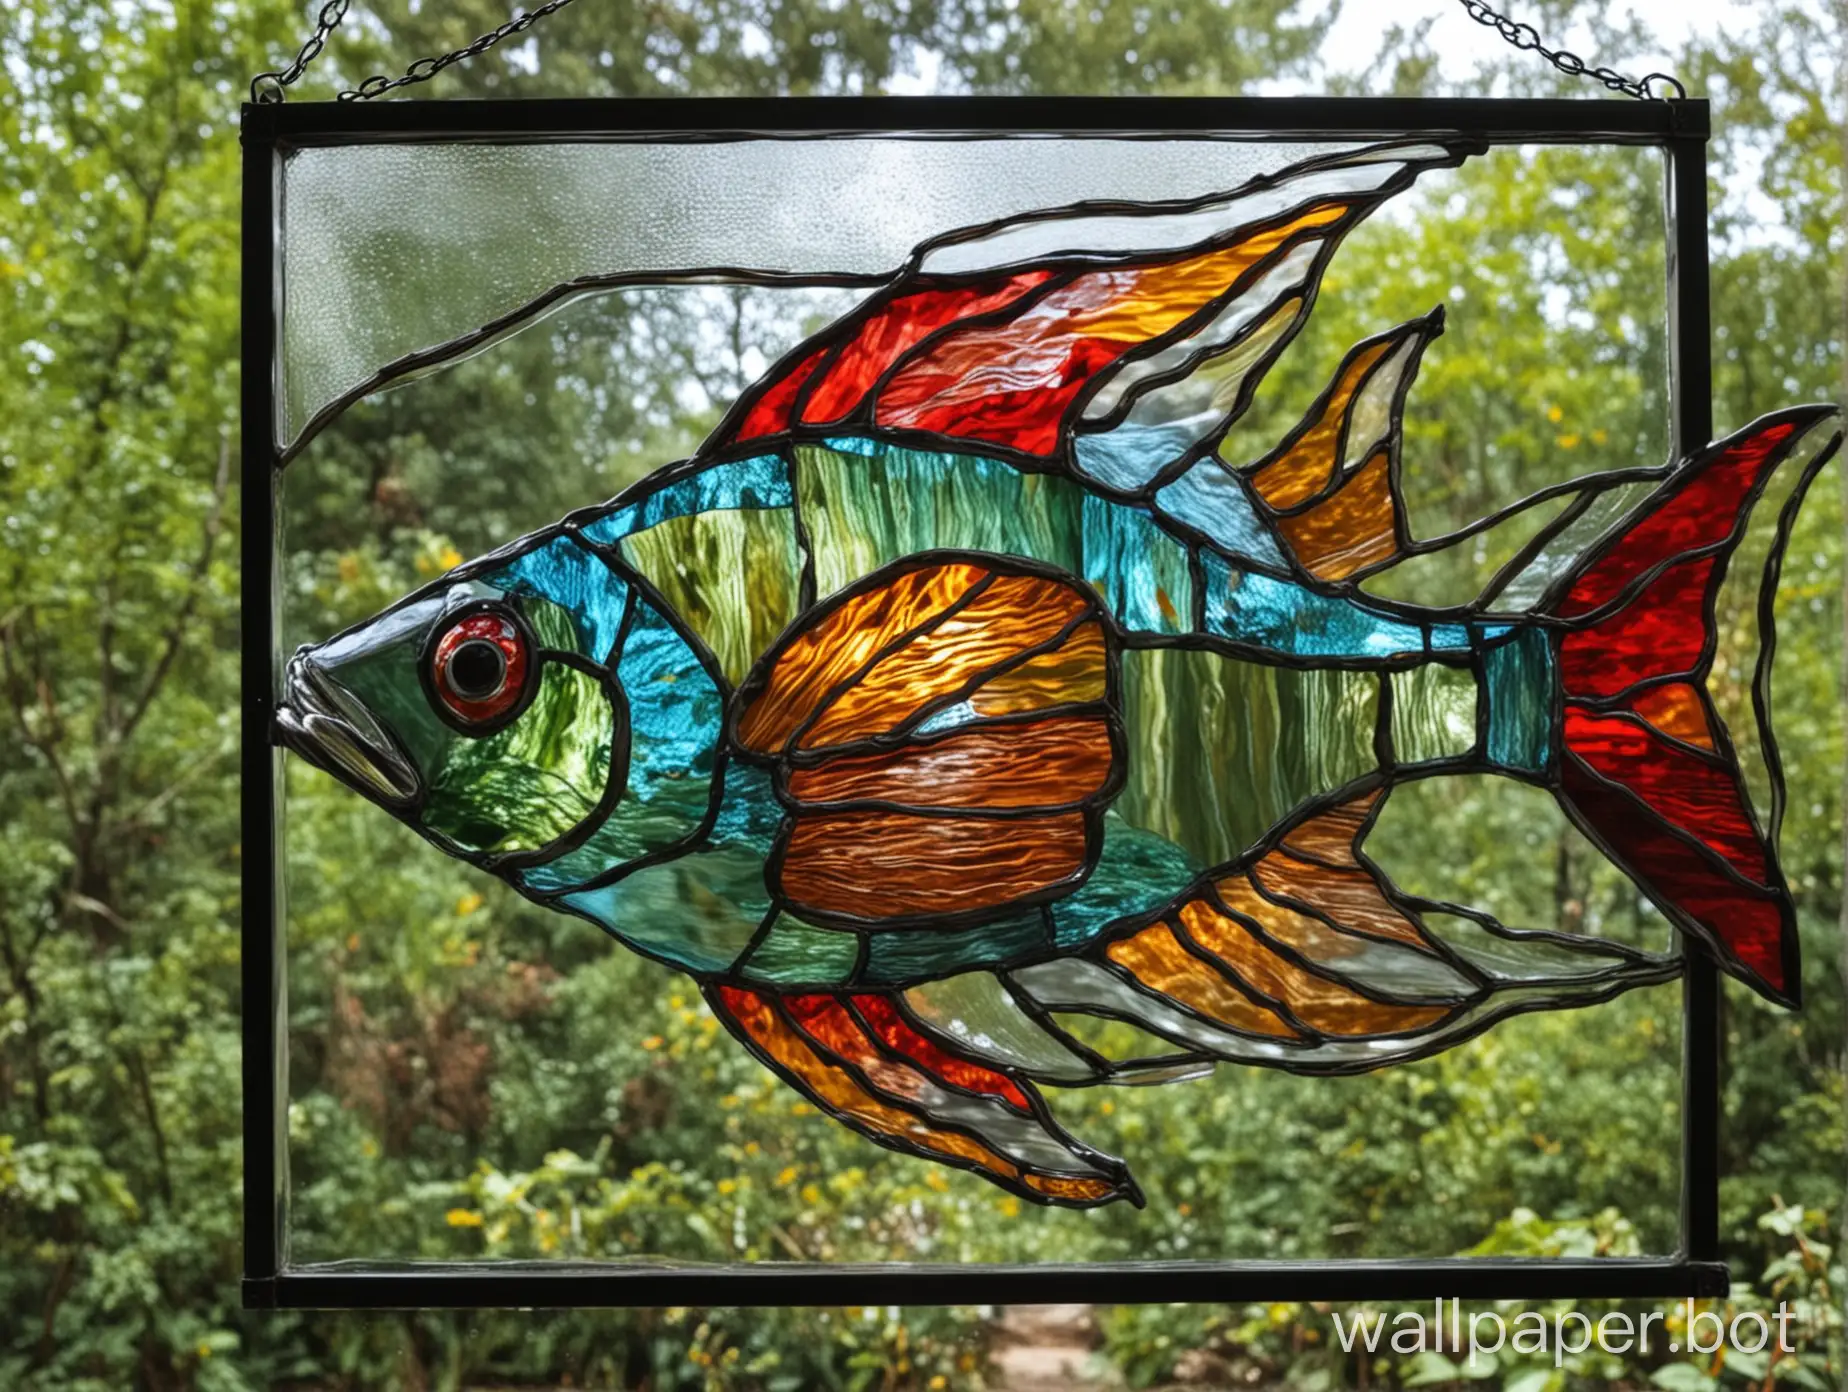 Vibrant-Stained-Glass-Flying-Fish-Artwork-Captivating-Marine-Life-in-Colorful-Flight